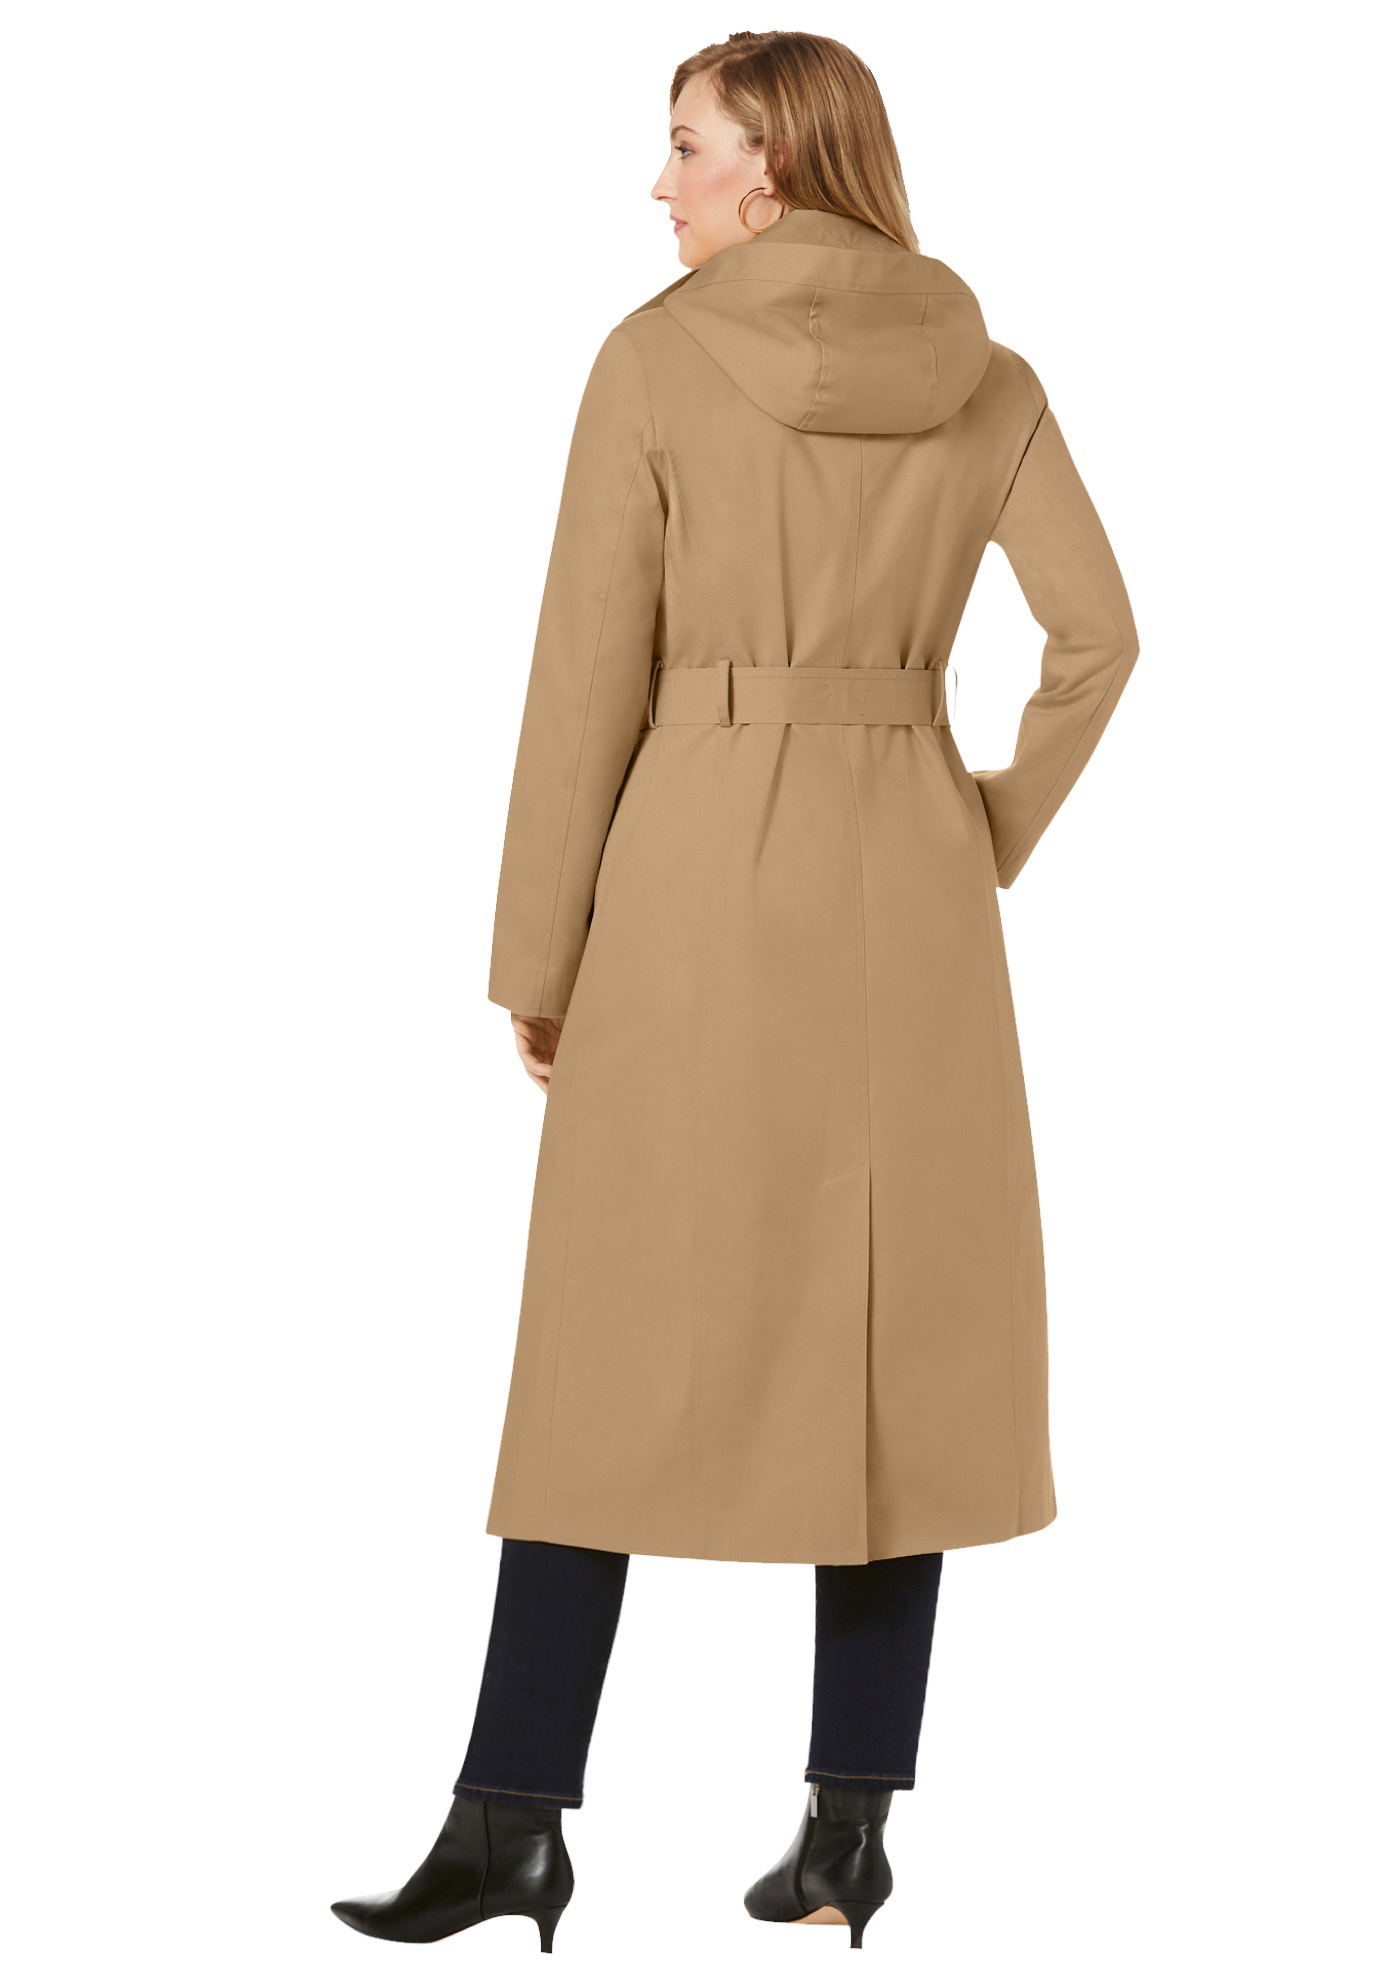 Jessica London Women's Plus Size Double Breasted Long Trench Coat Raincoat - image 3 of 6